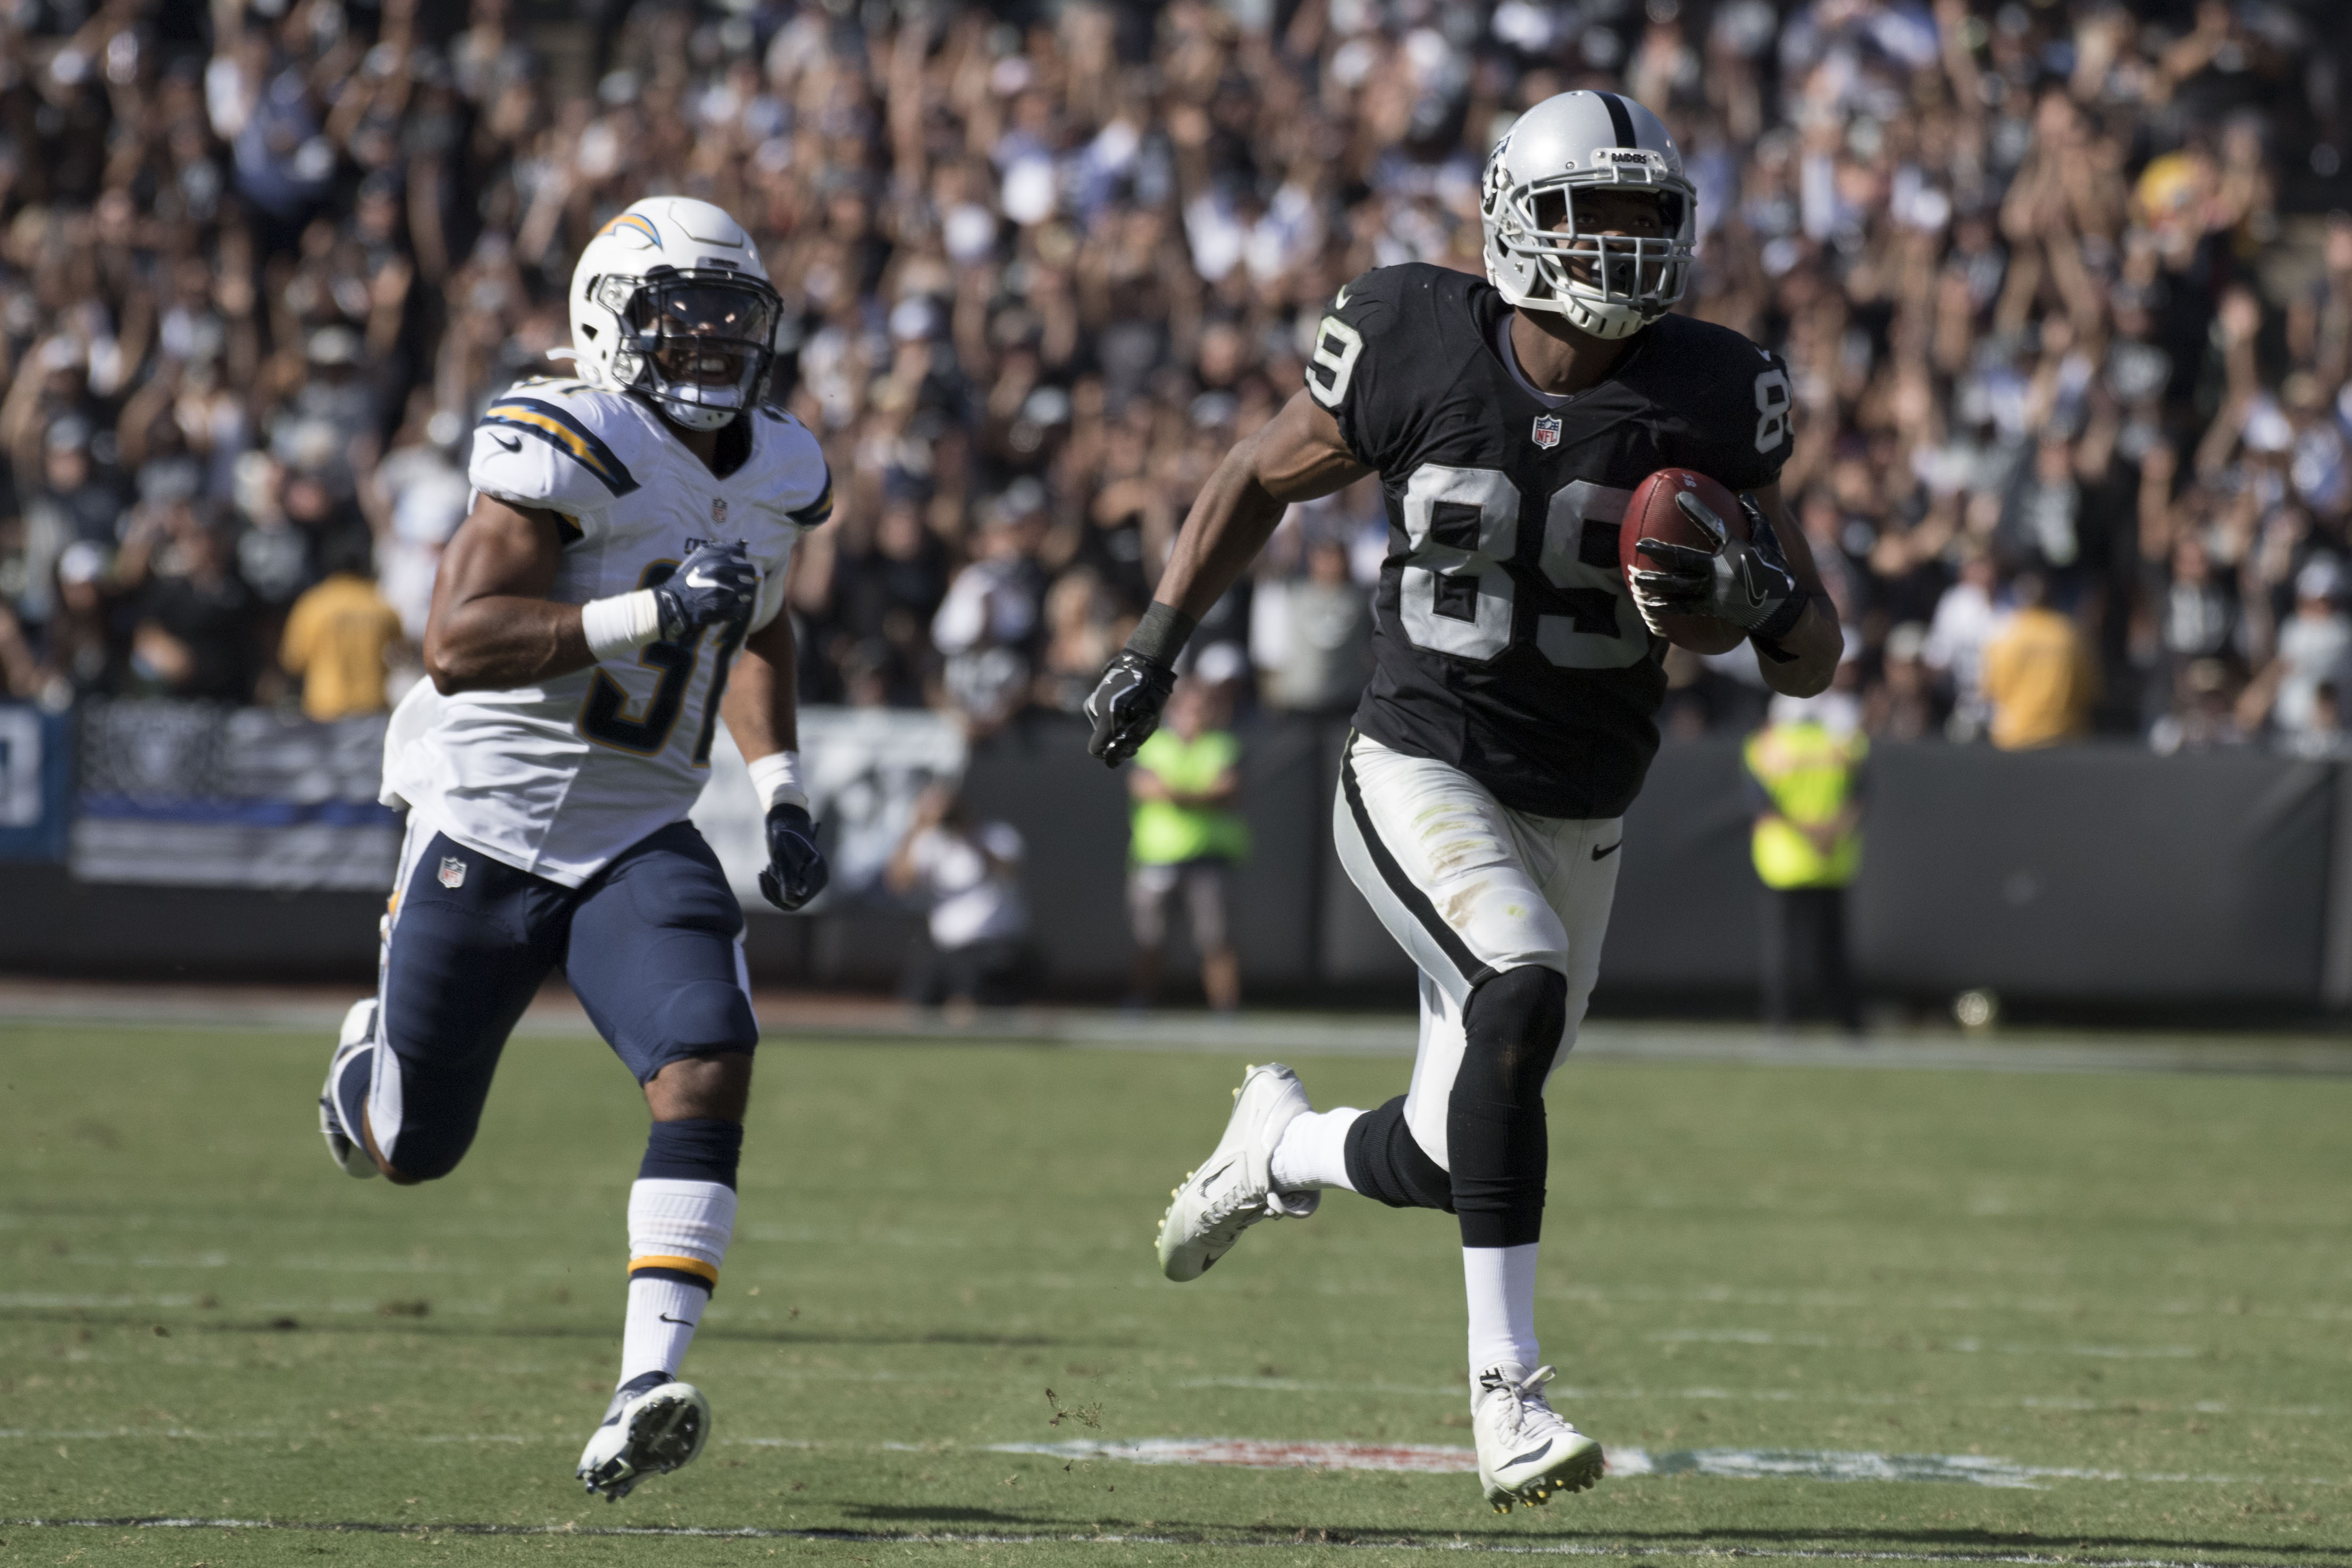 NFL: San Diego Chargers at Oakland Raiders